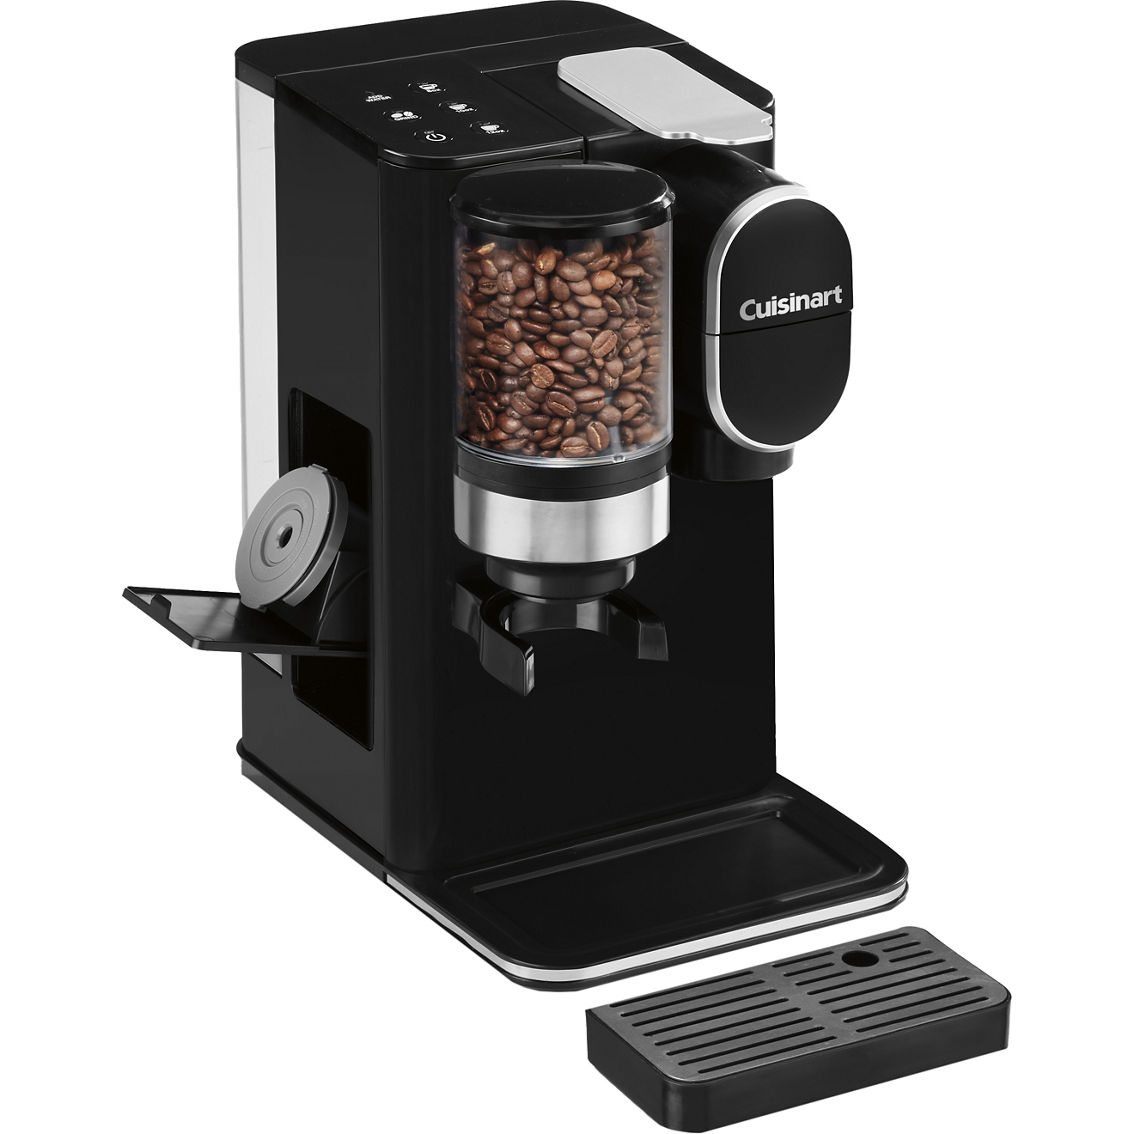 Cuisinart Grind and Brew Single Serve Coffeemaker - Image 3 of 9